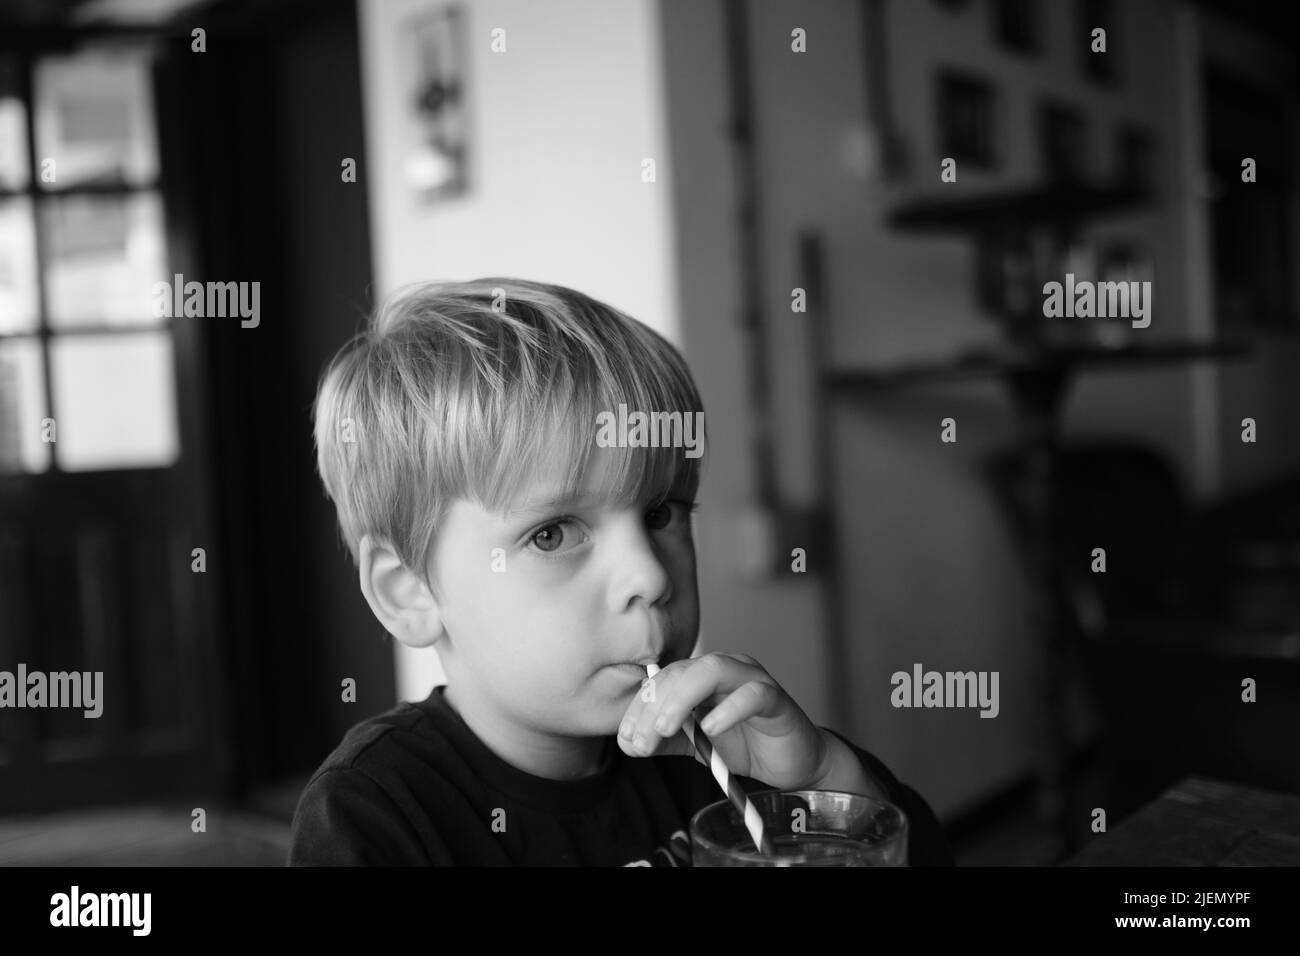 Boy, aged 3, drinking from a straw Stock Photo